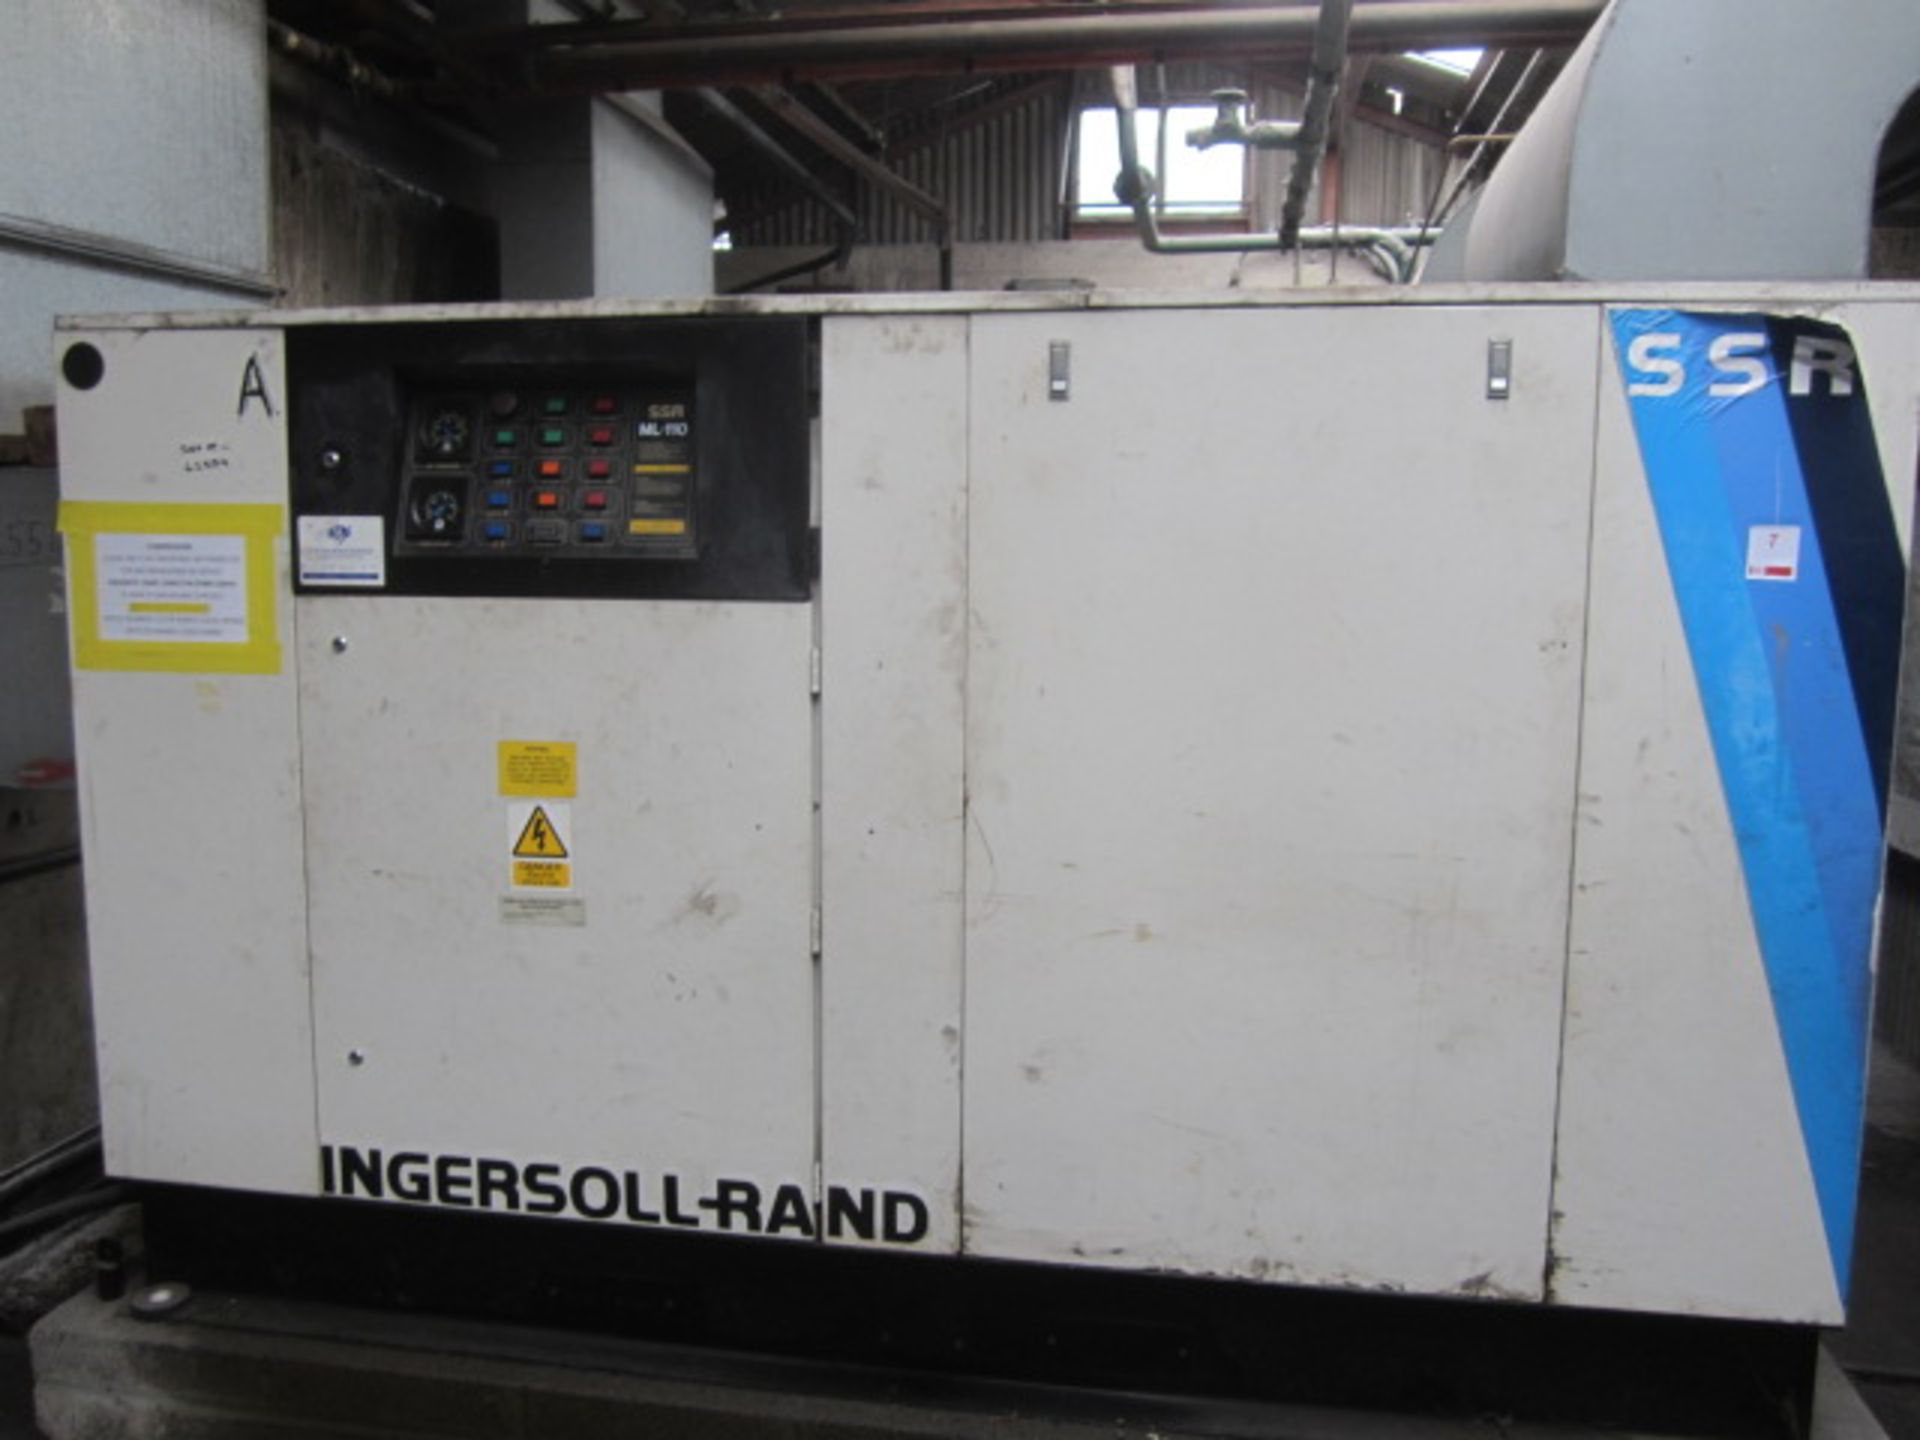 Ingersoll Rand SSR ML-110 packaged air compressor, serial no. 62554, recorded hours 44140 - Image 3 of 7